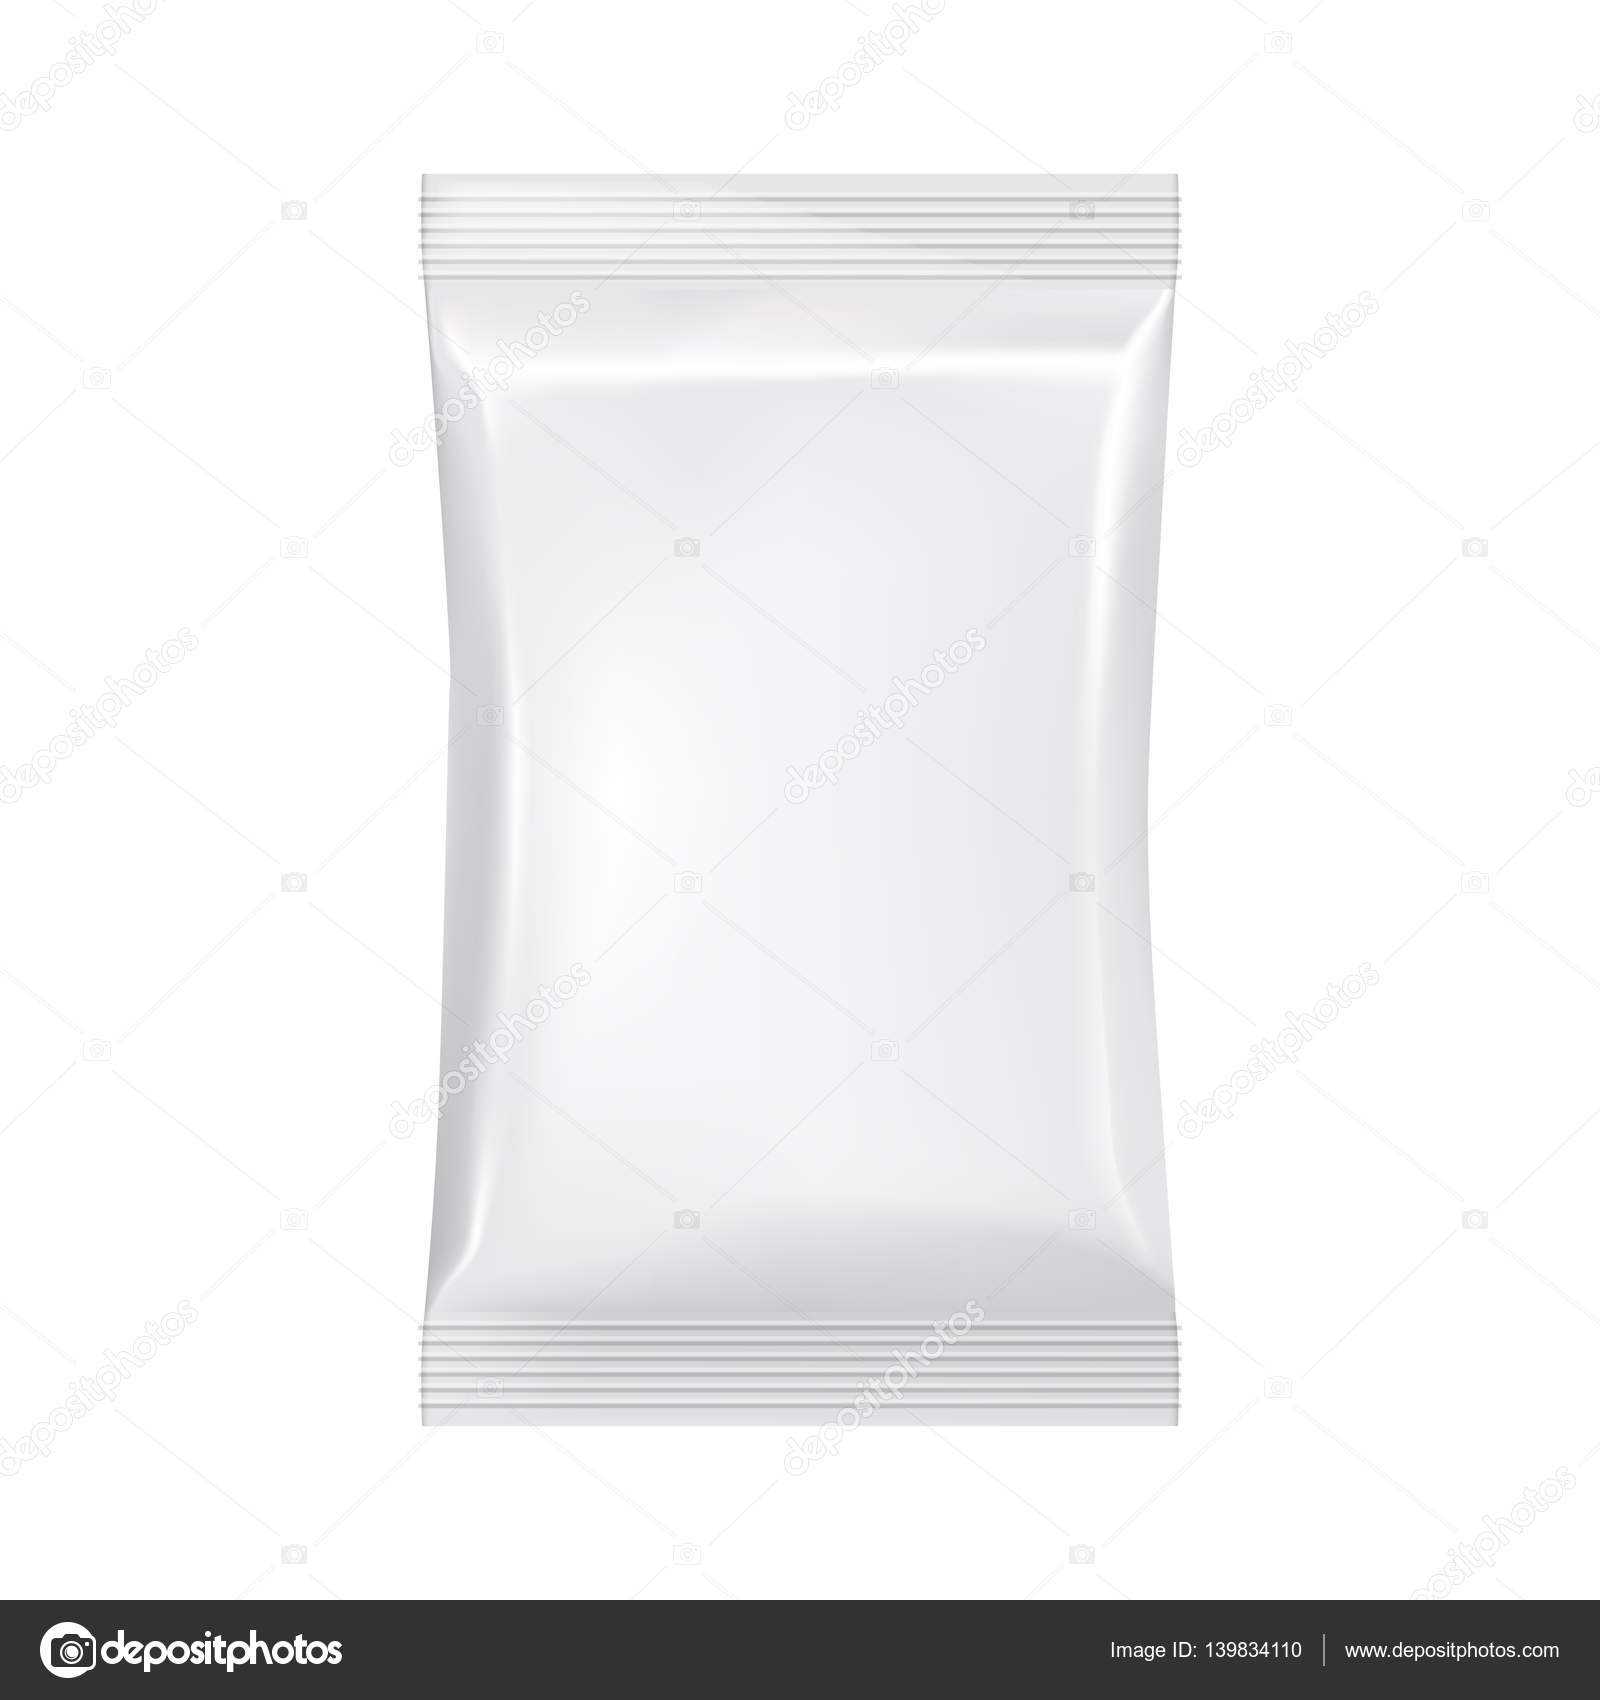 Blank Packaging Template Mockup Isolated On White. — Stock Within Blank Packaging Templates